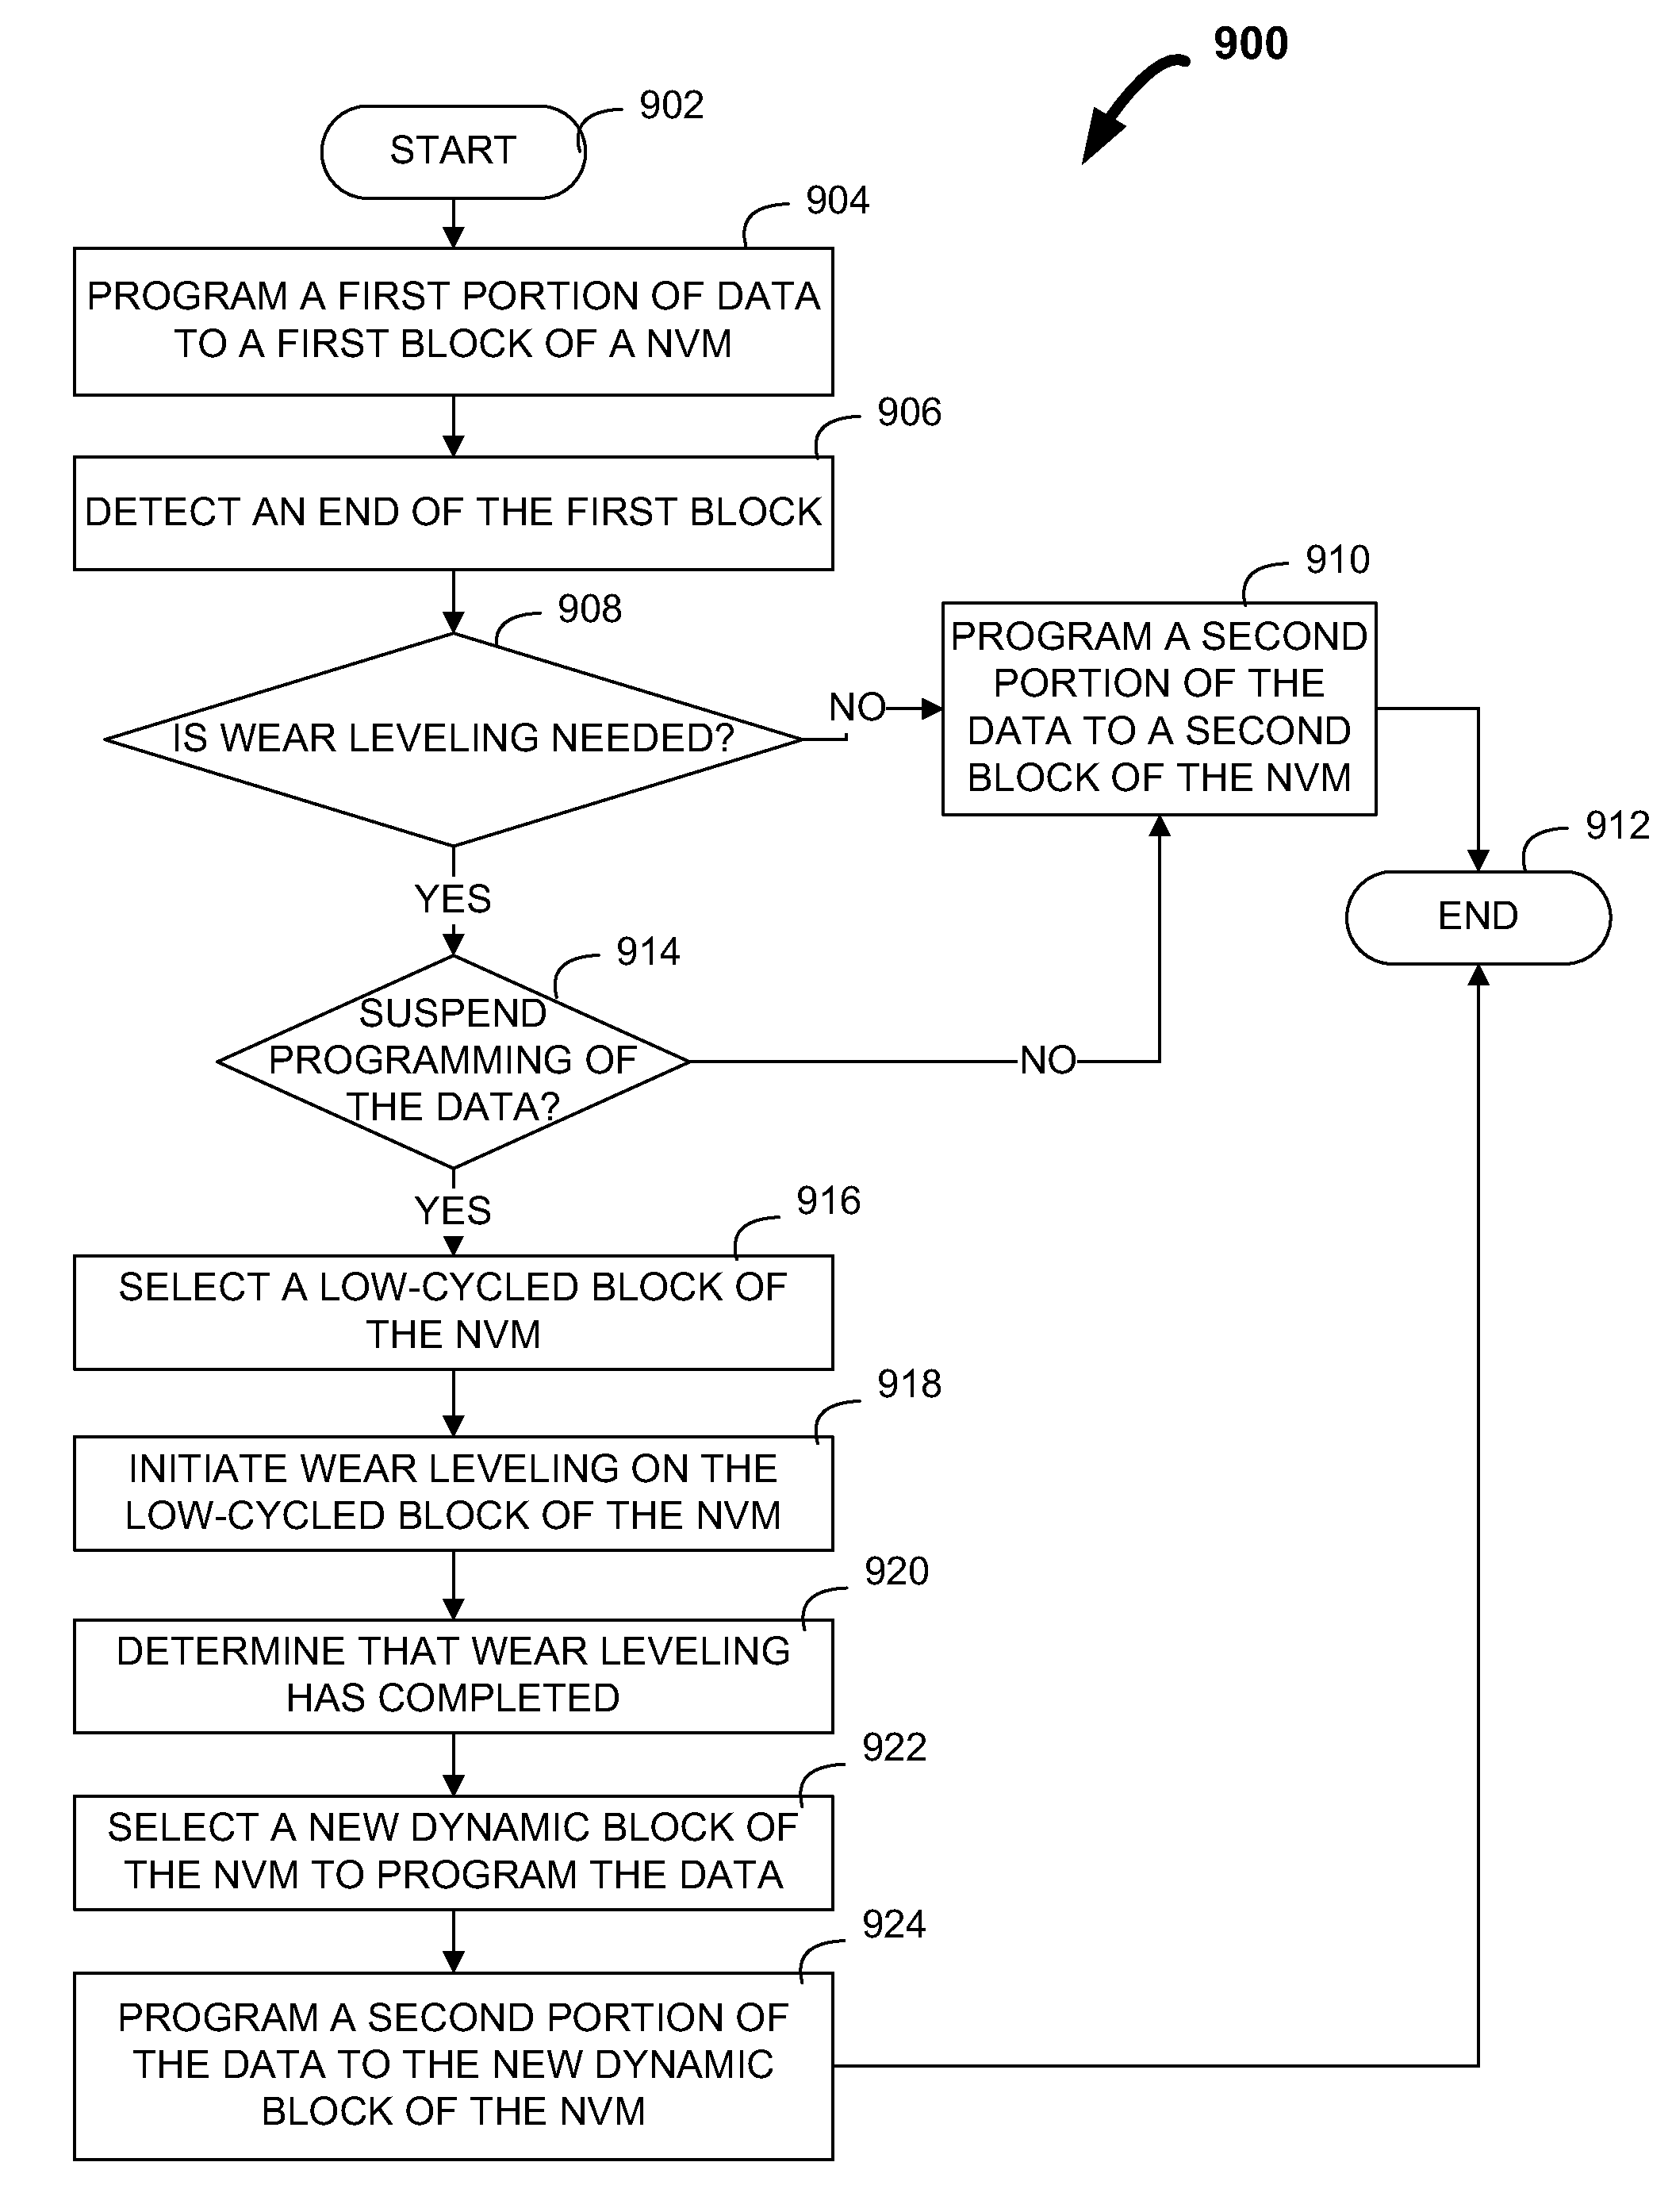 Initiating wear leveling for a non-volatile memory